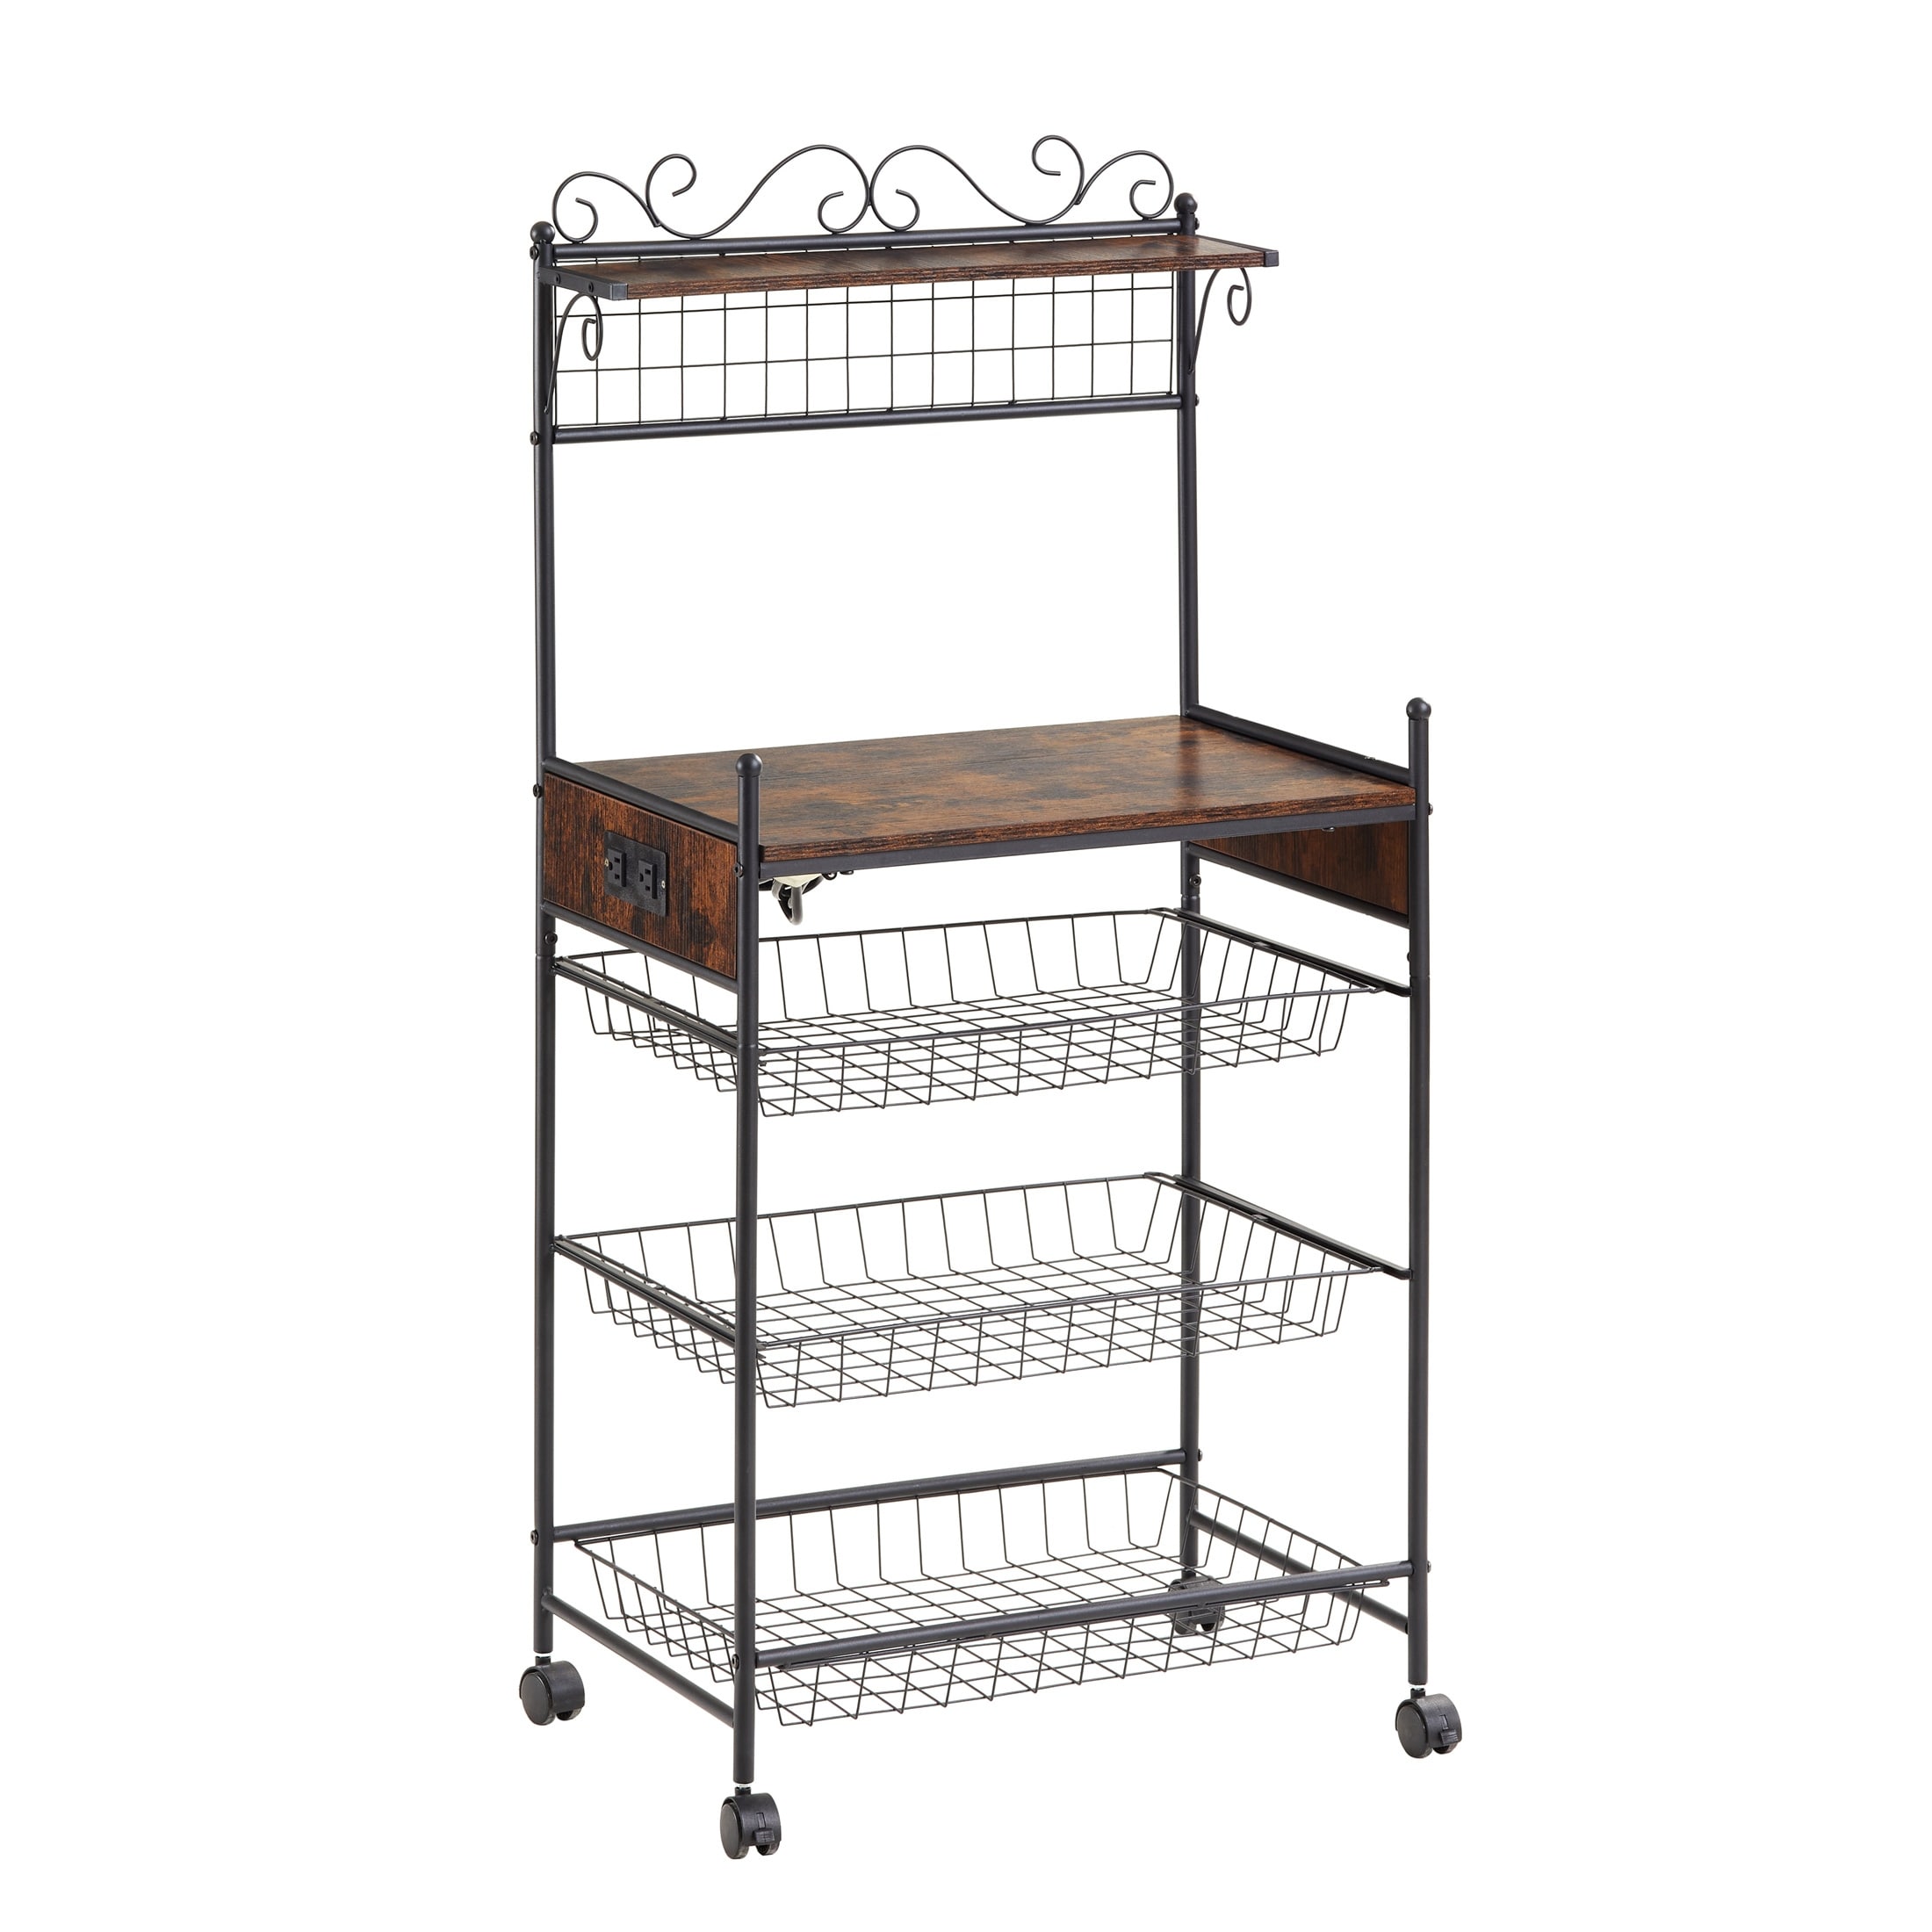 https://ak1.ostkcdn.com/images/products/is/images/direct/ffa7932ea717a5d33e2a60616711f11d8c0c7f4c/Kitchen-Storage-Shelf-Rack-for-Spices.jpg